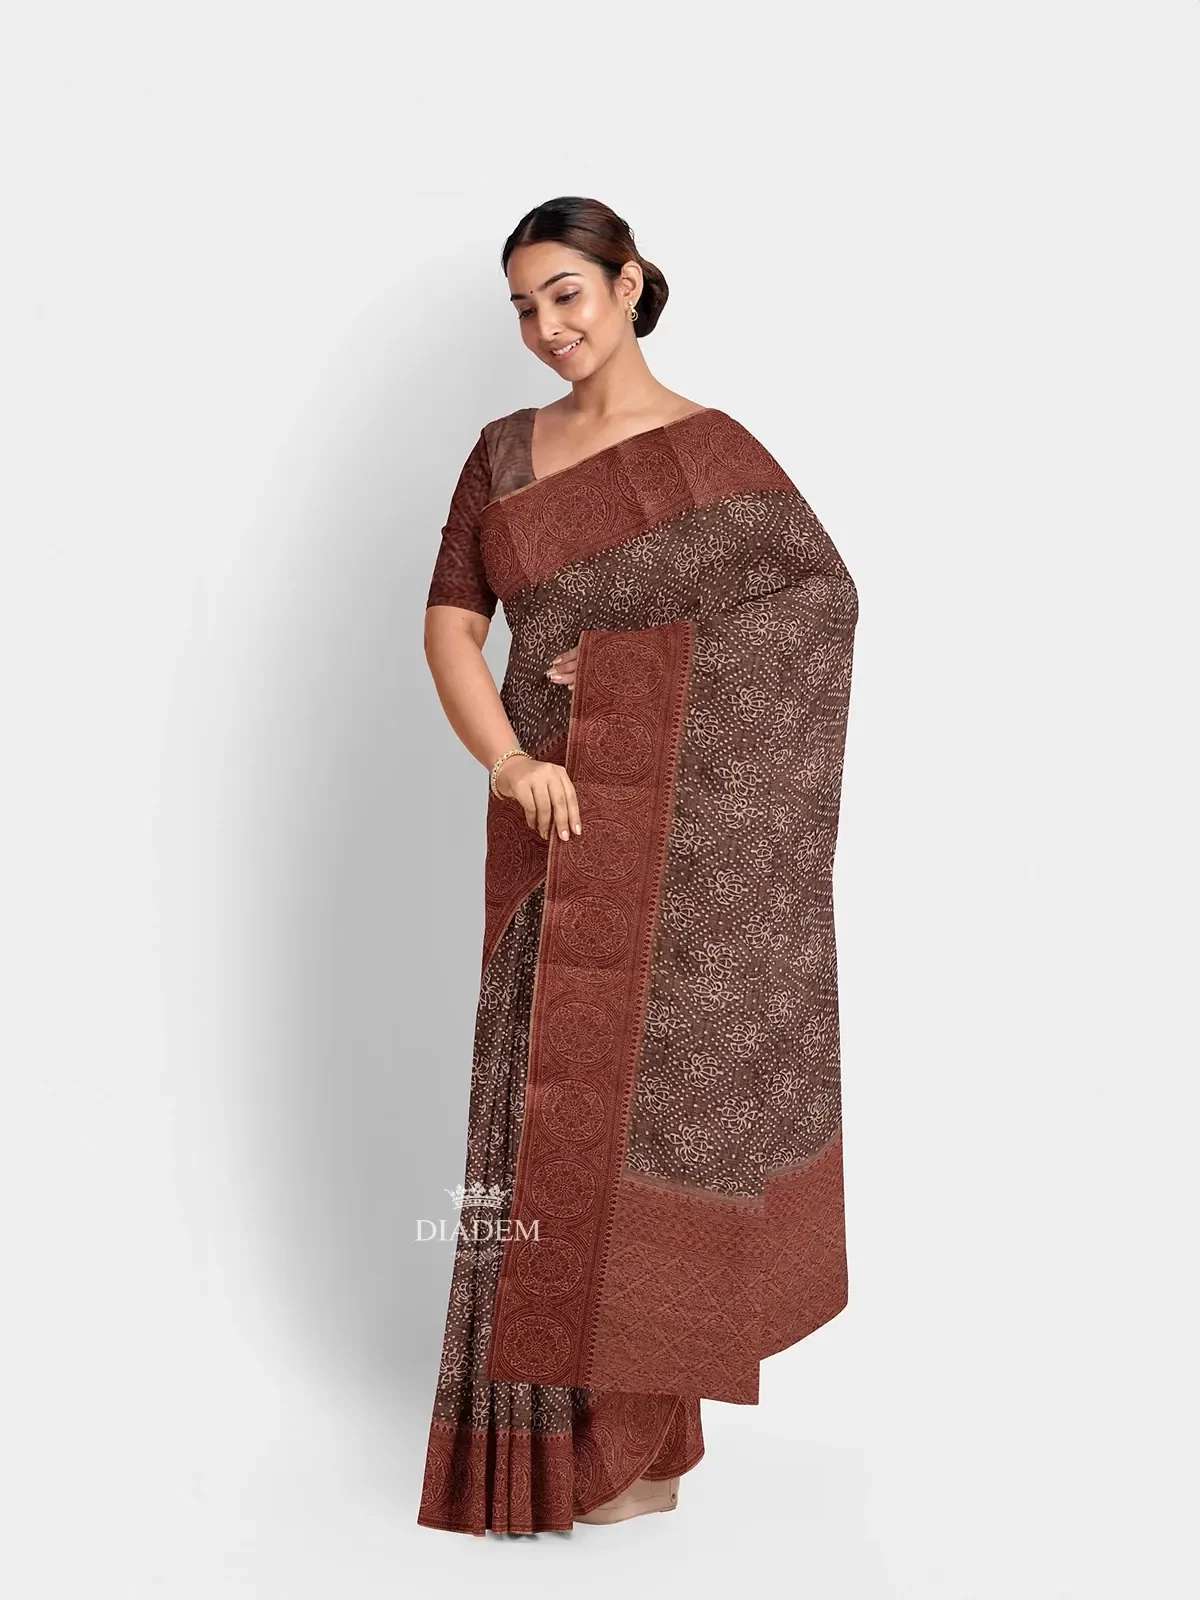 Brown Chanderi Silk Cotton Saree With Floral Prints On The Body And Zari Border